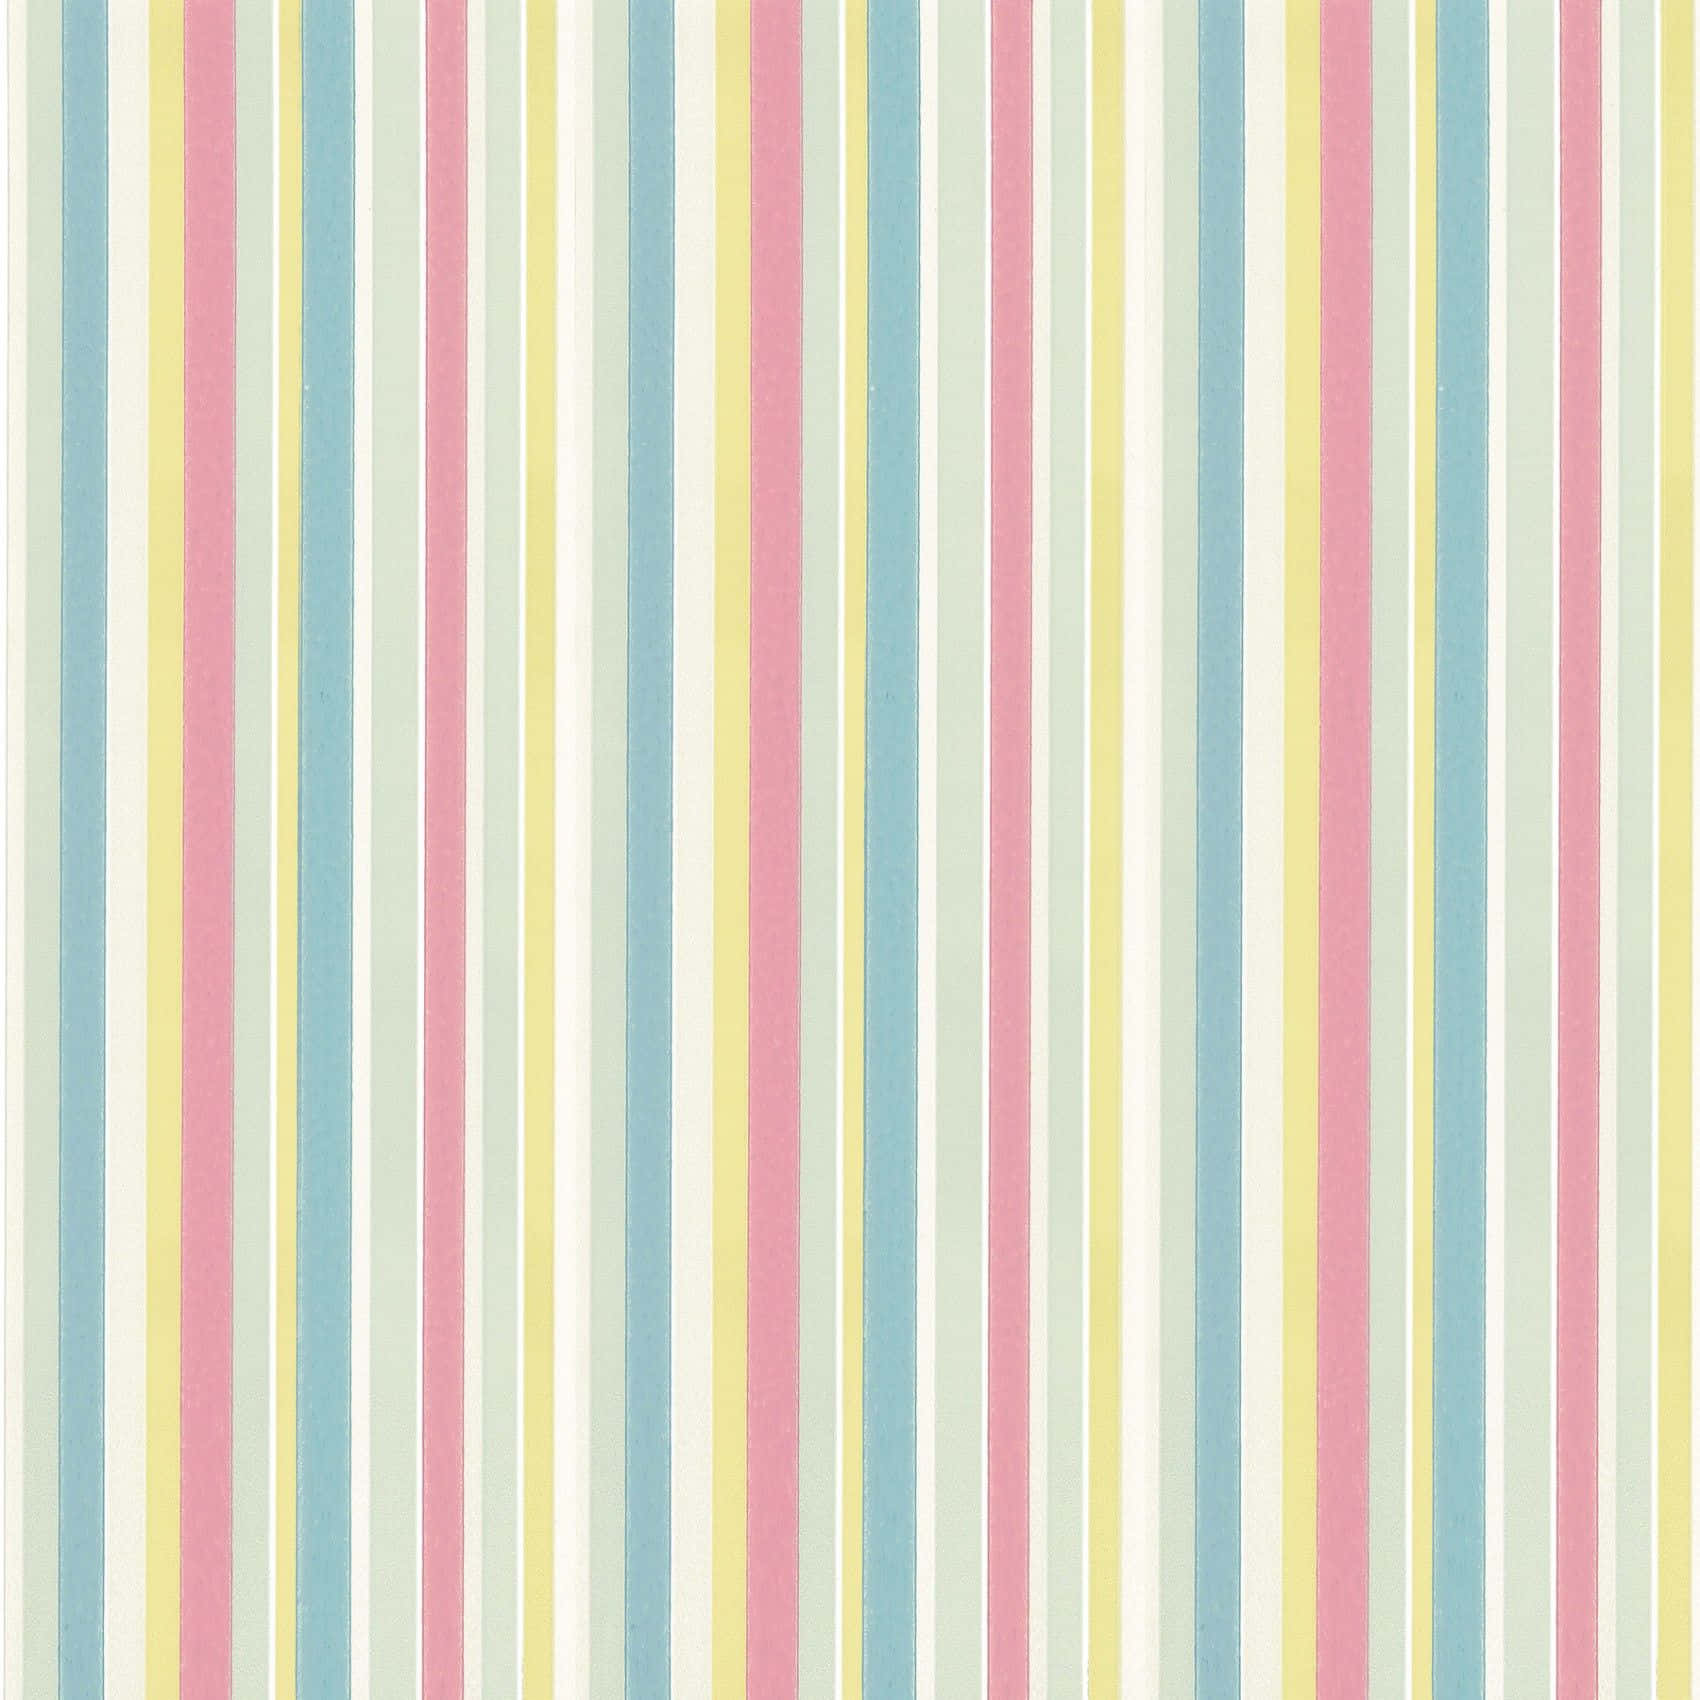 A Pink, Blue And Yellow Striped Wallpaper Wallpaper